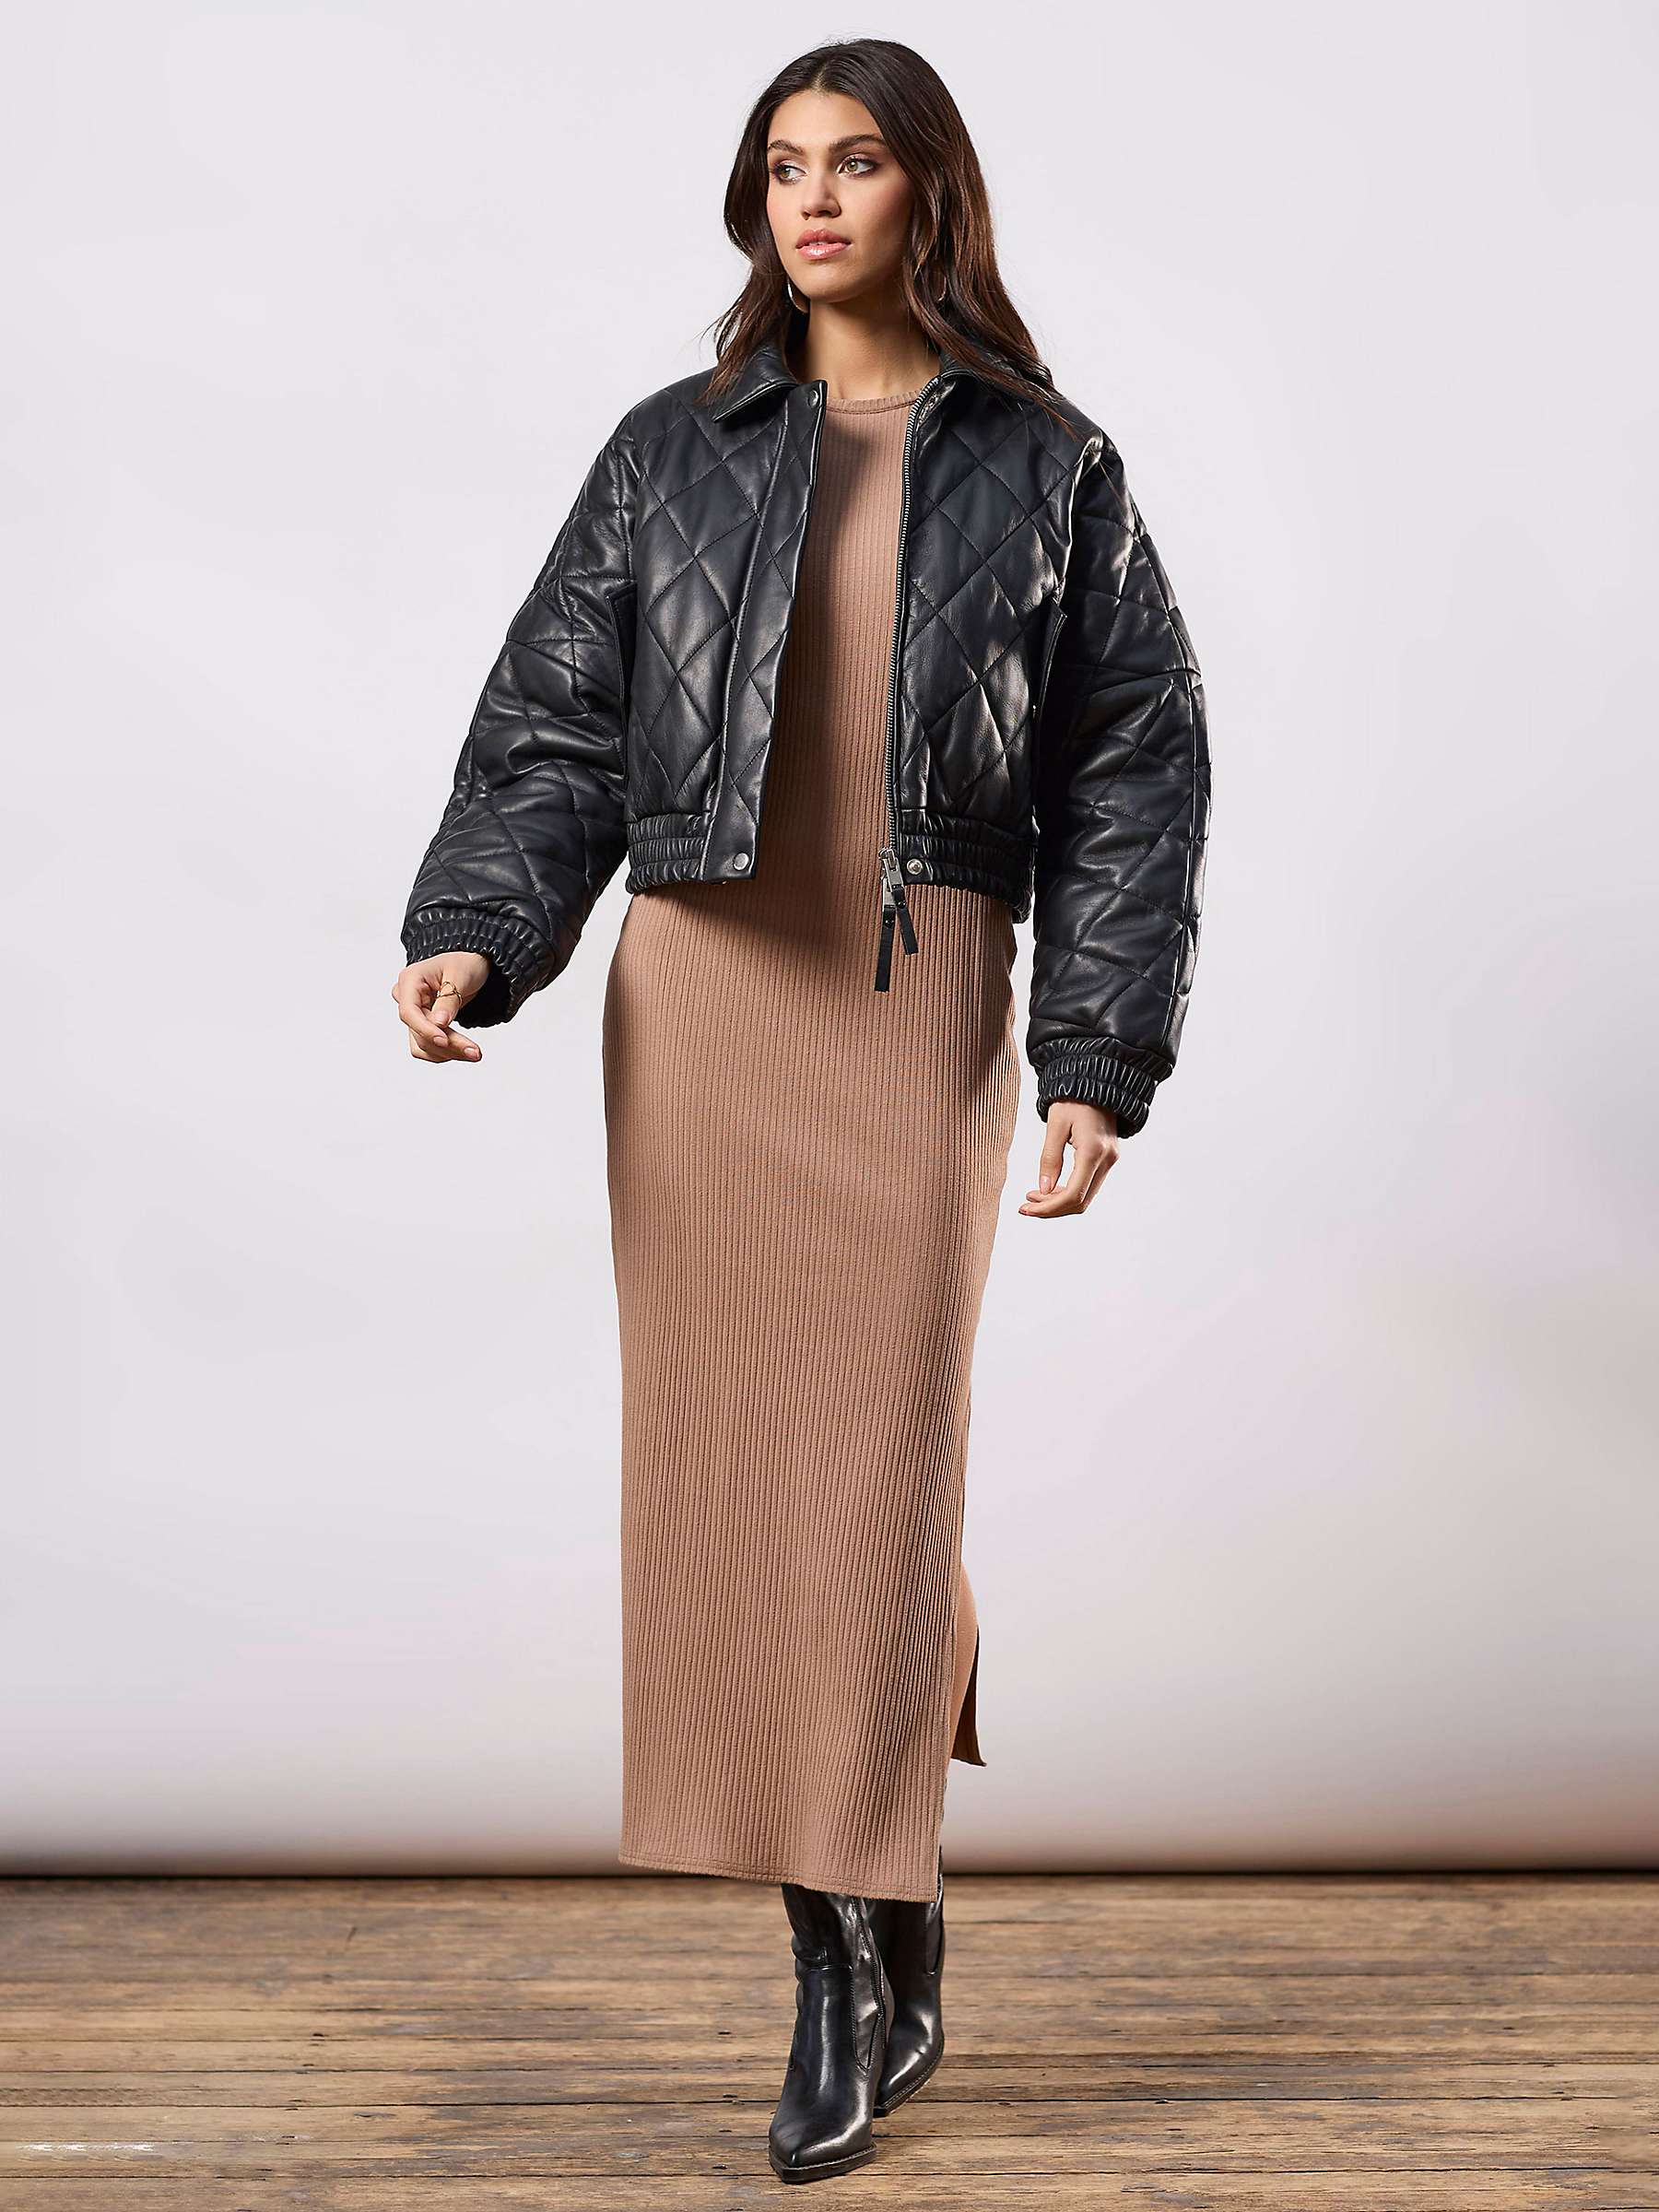 Buy Closet London Quilted Leather Bomber Jacket, Black Online at johnlewis.com